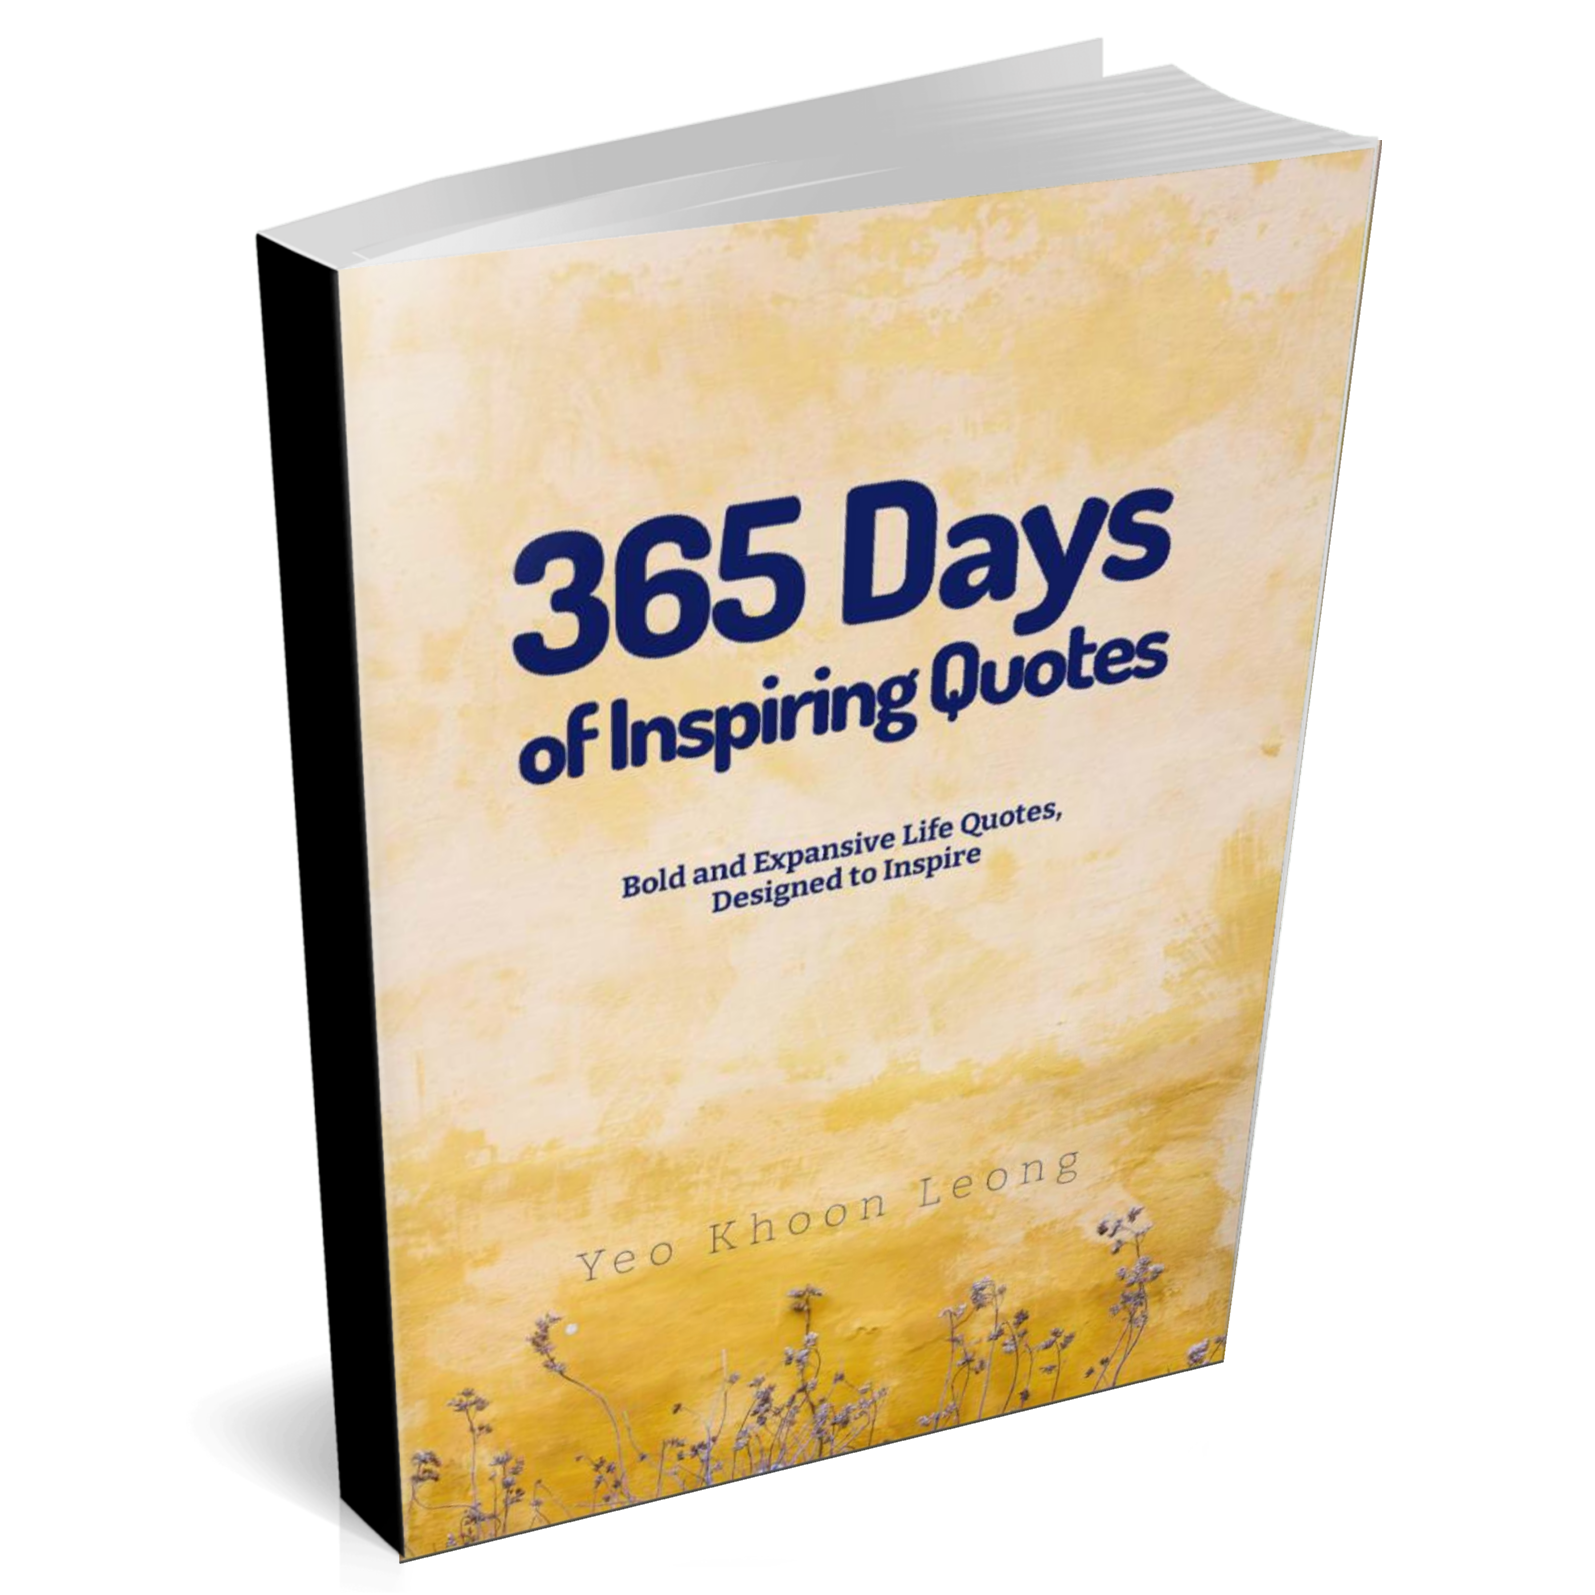 365 Days of Inspiring Quotes